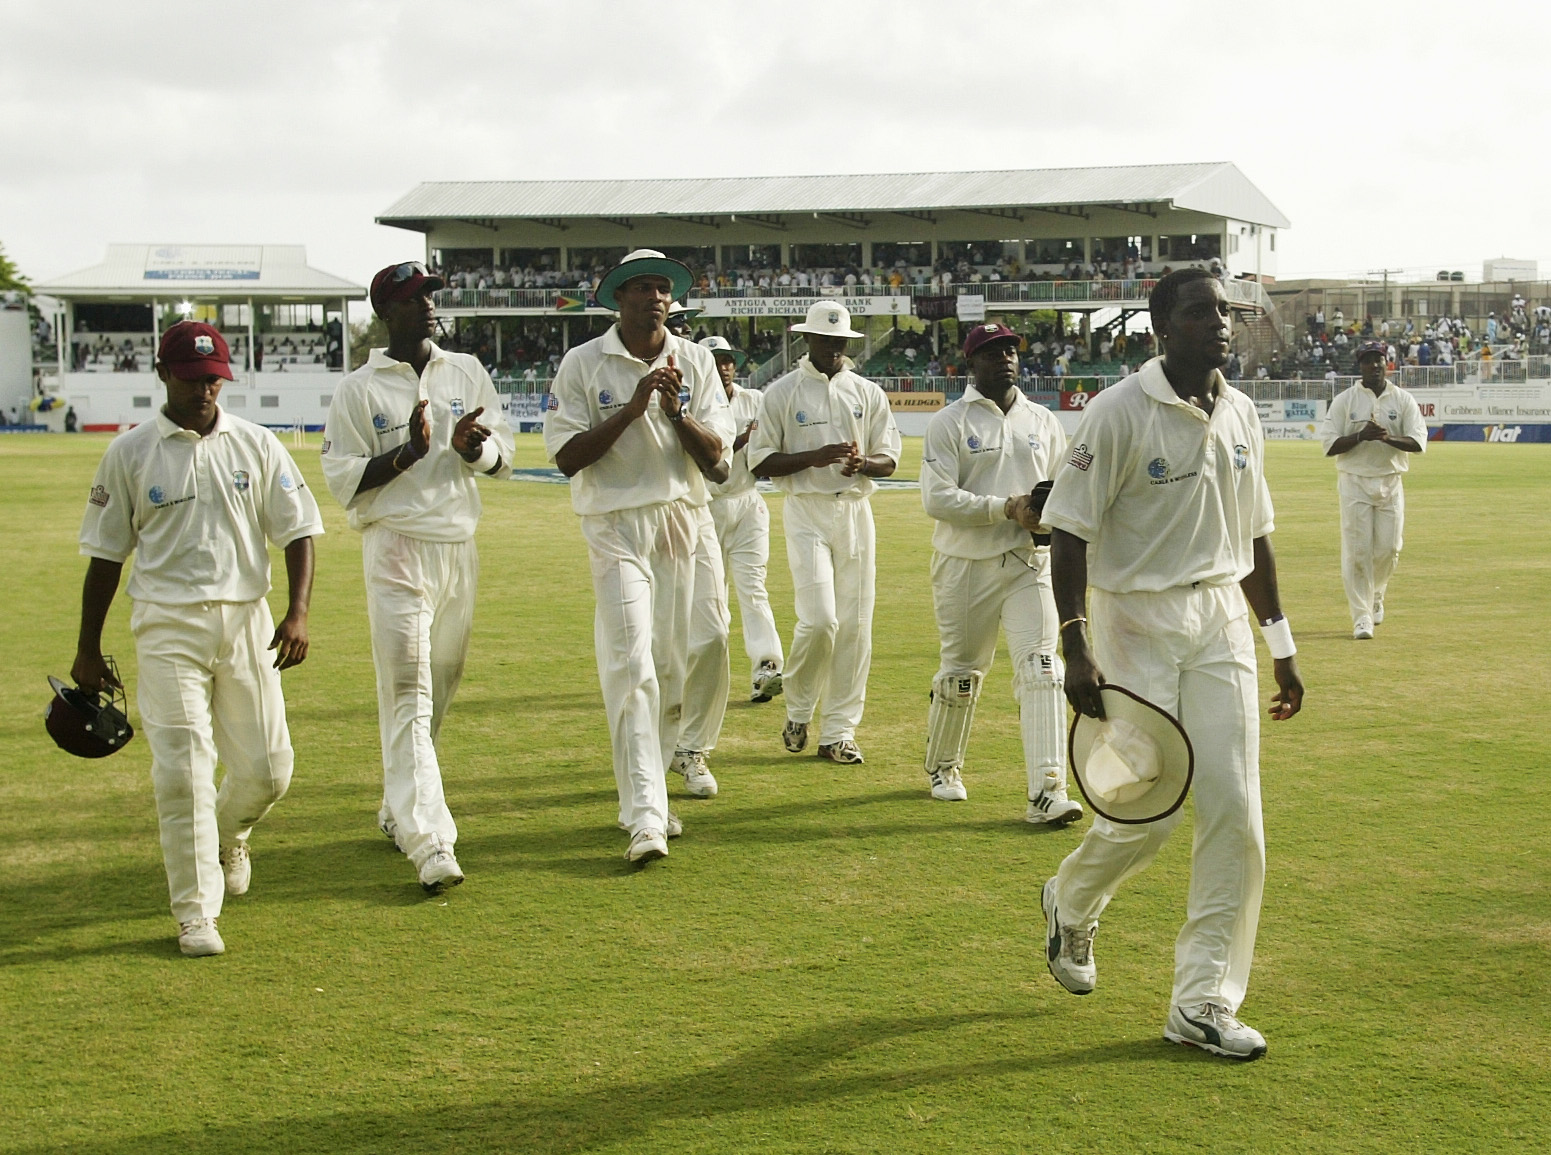 #OnThisDay in 1982 – West Indies and USA speed merchant born